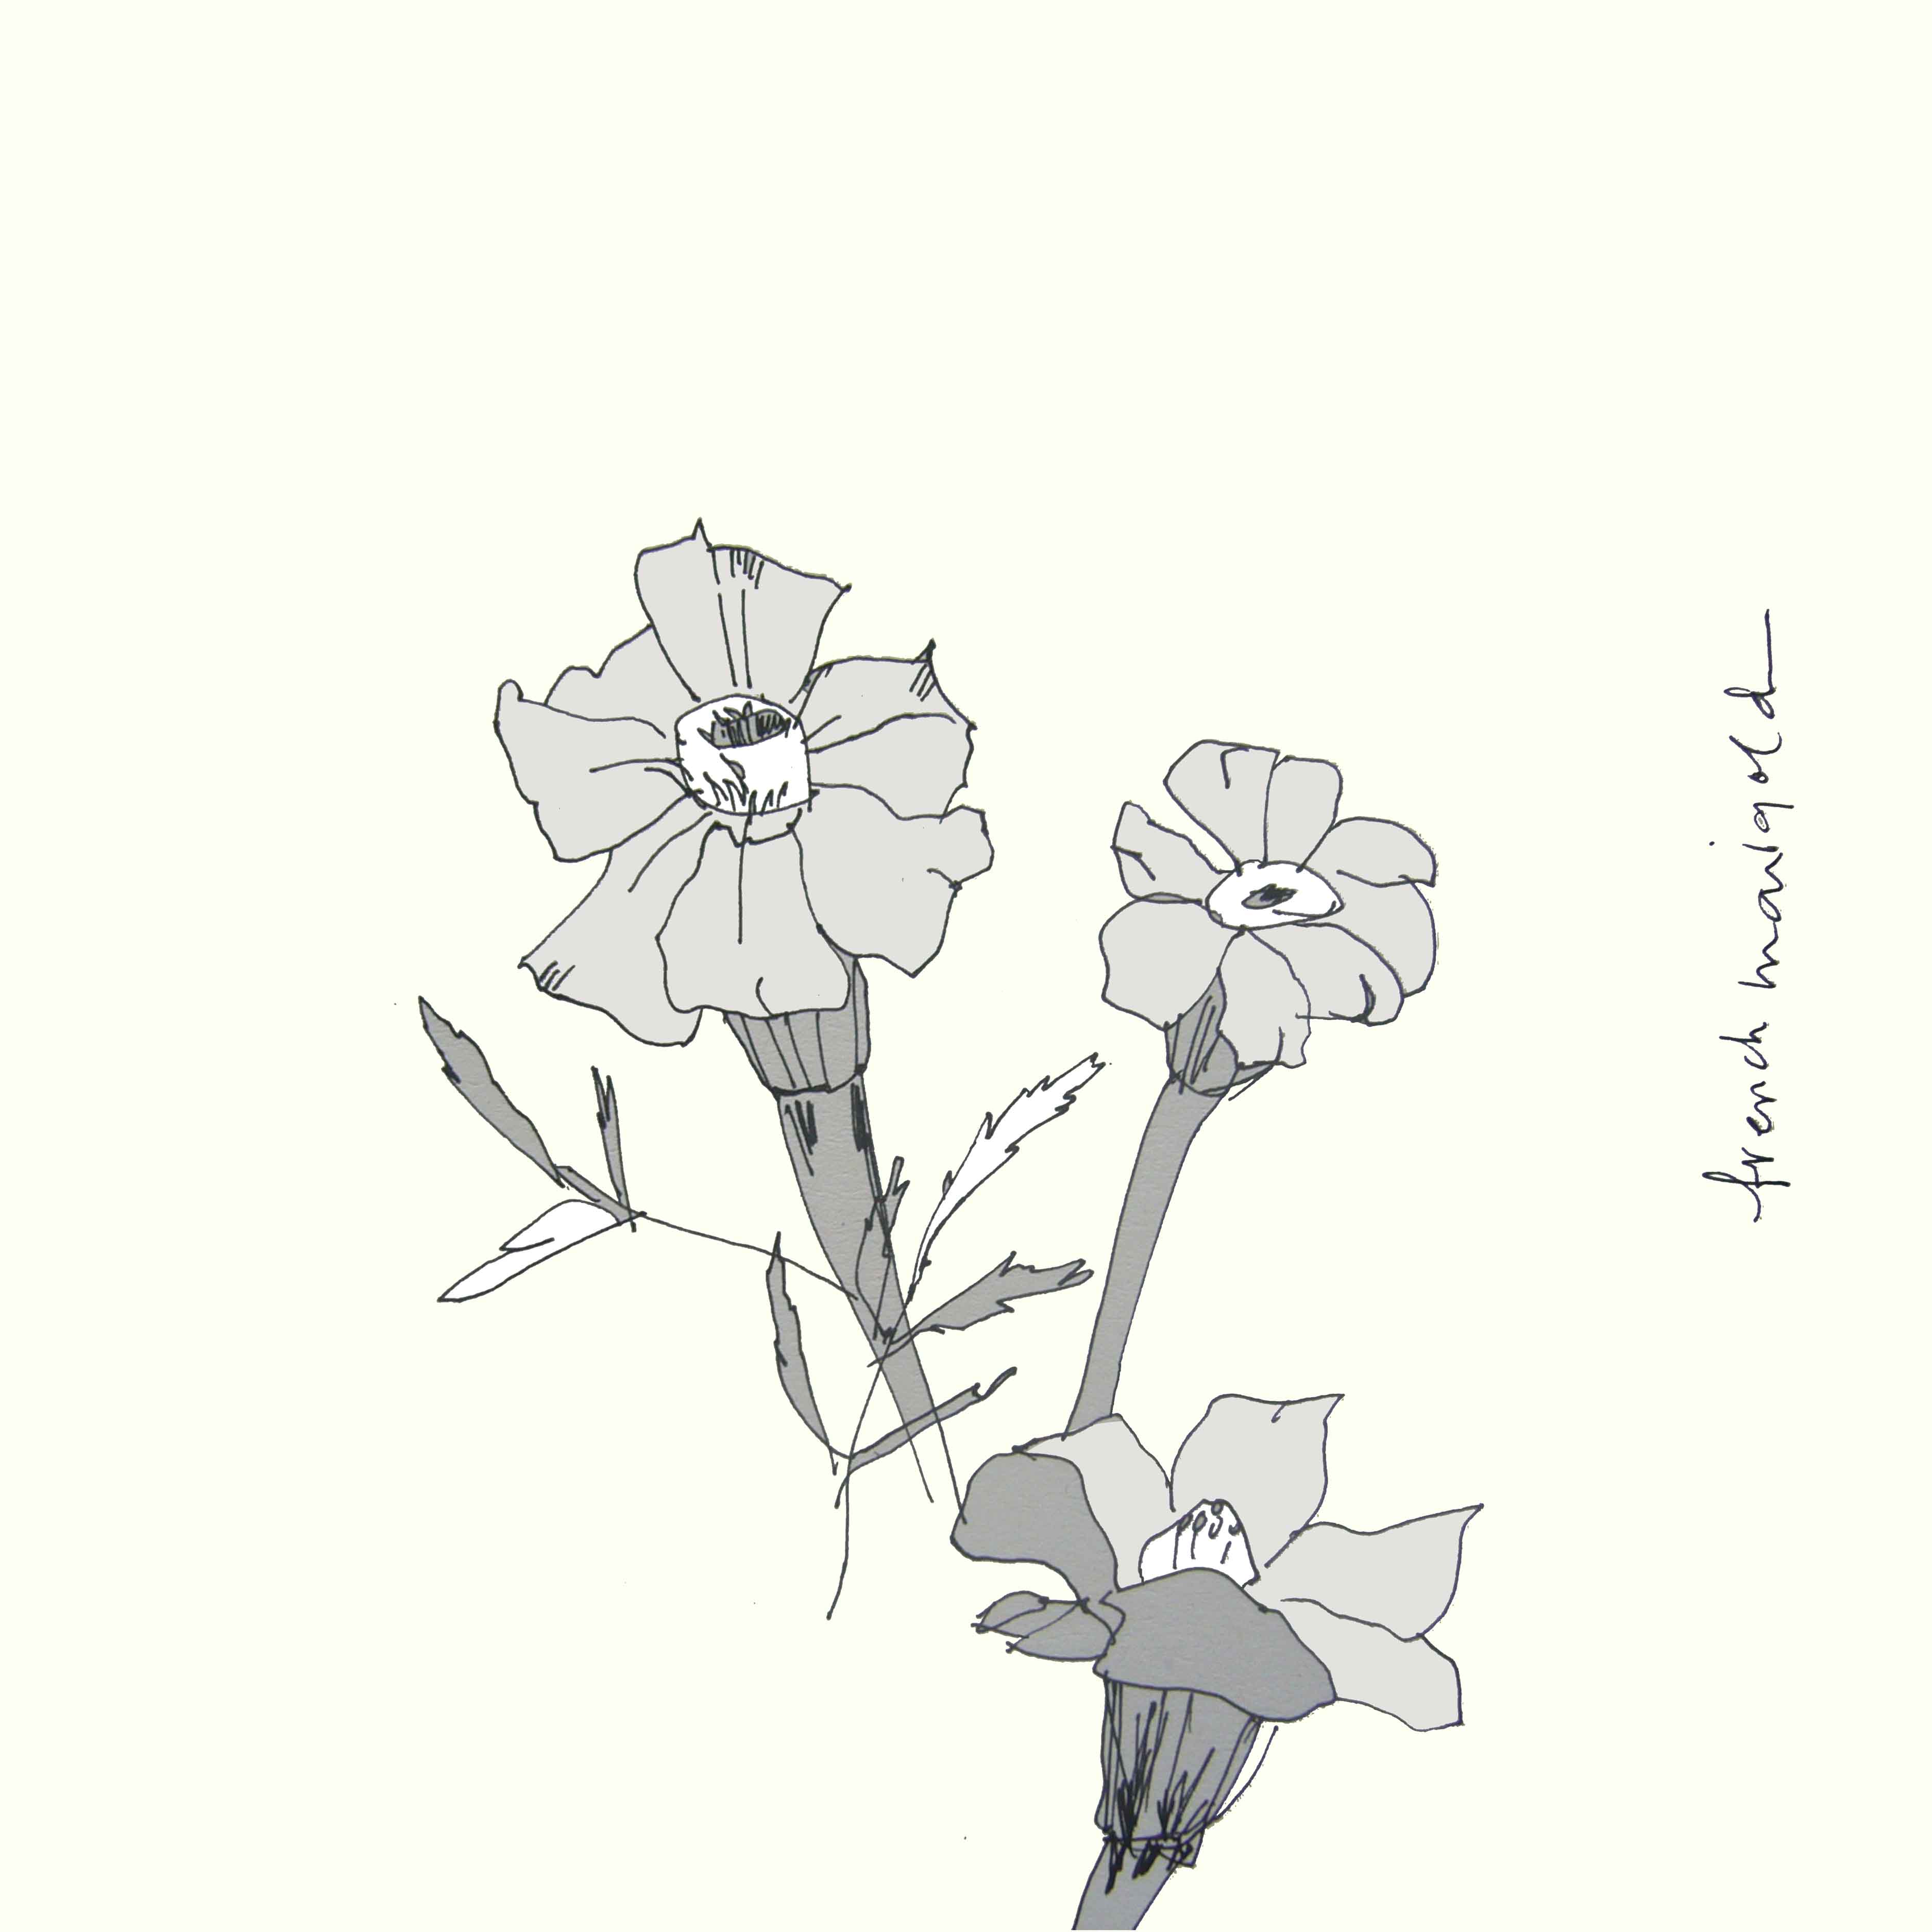 art every day number 65 / drawing / sketchbook / french marigold